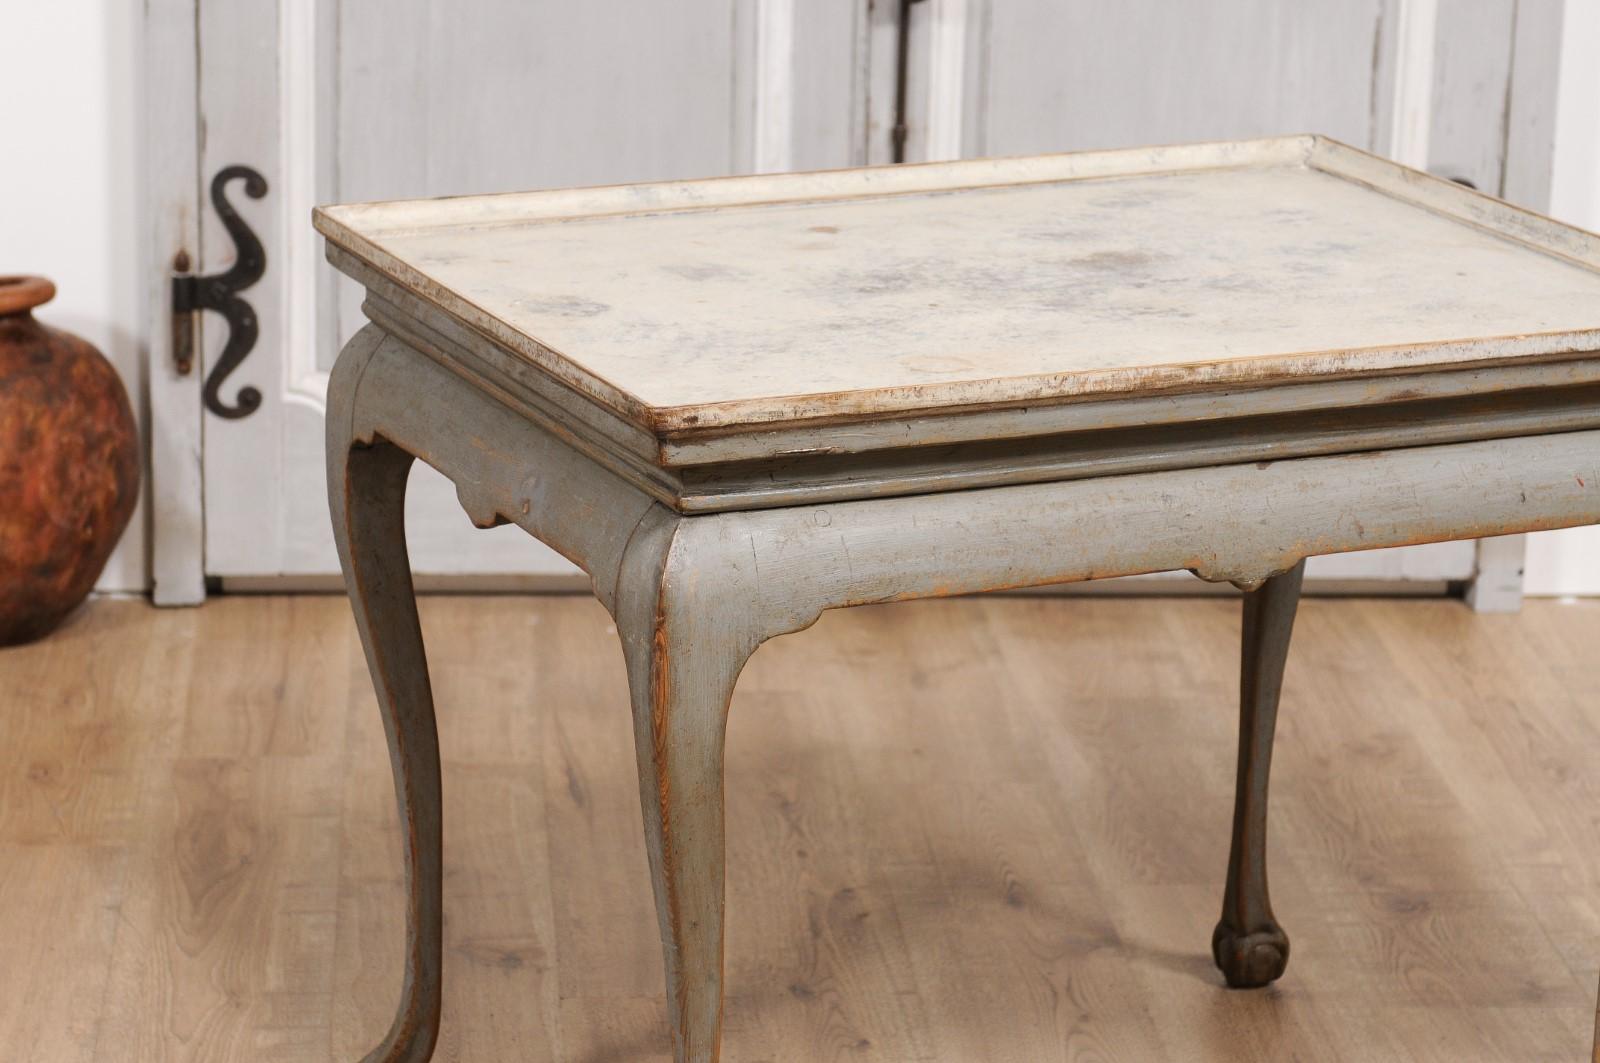 1750s Swedish Rococo Gray Painted Tea Table with Tray Top and Ball and Claw Feet For Sale 3